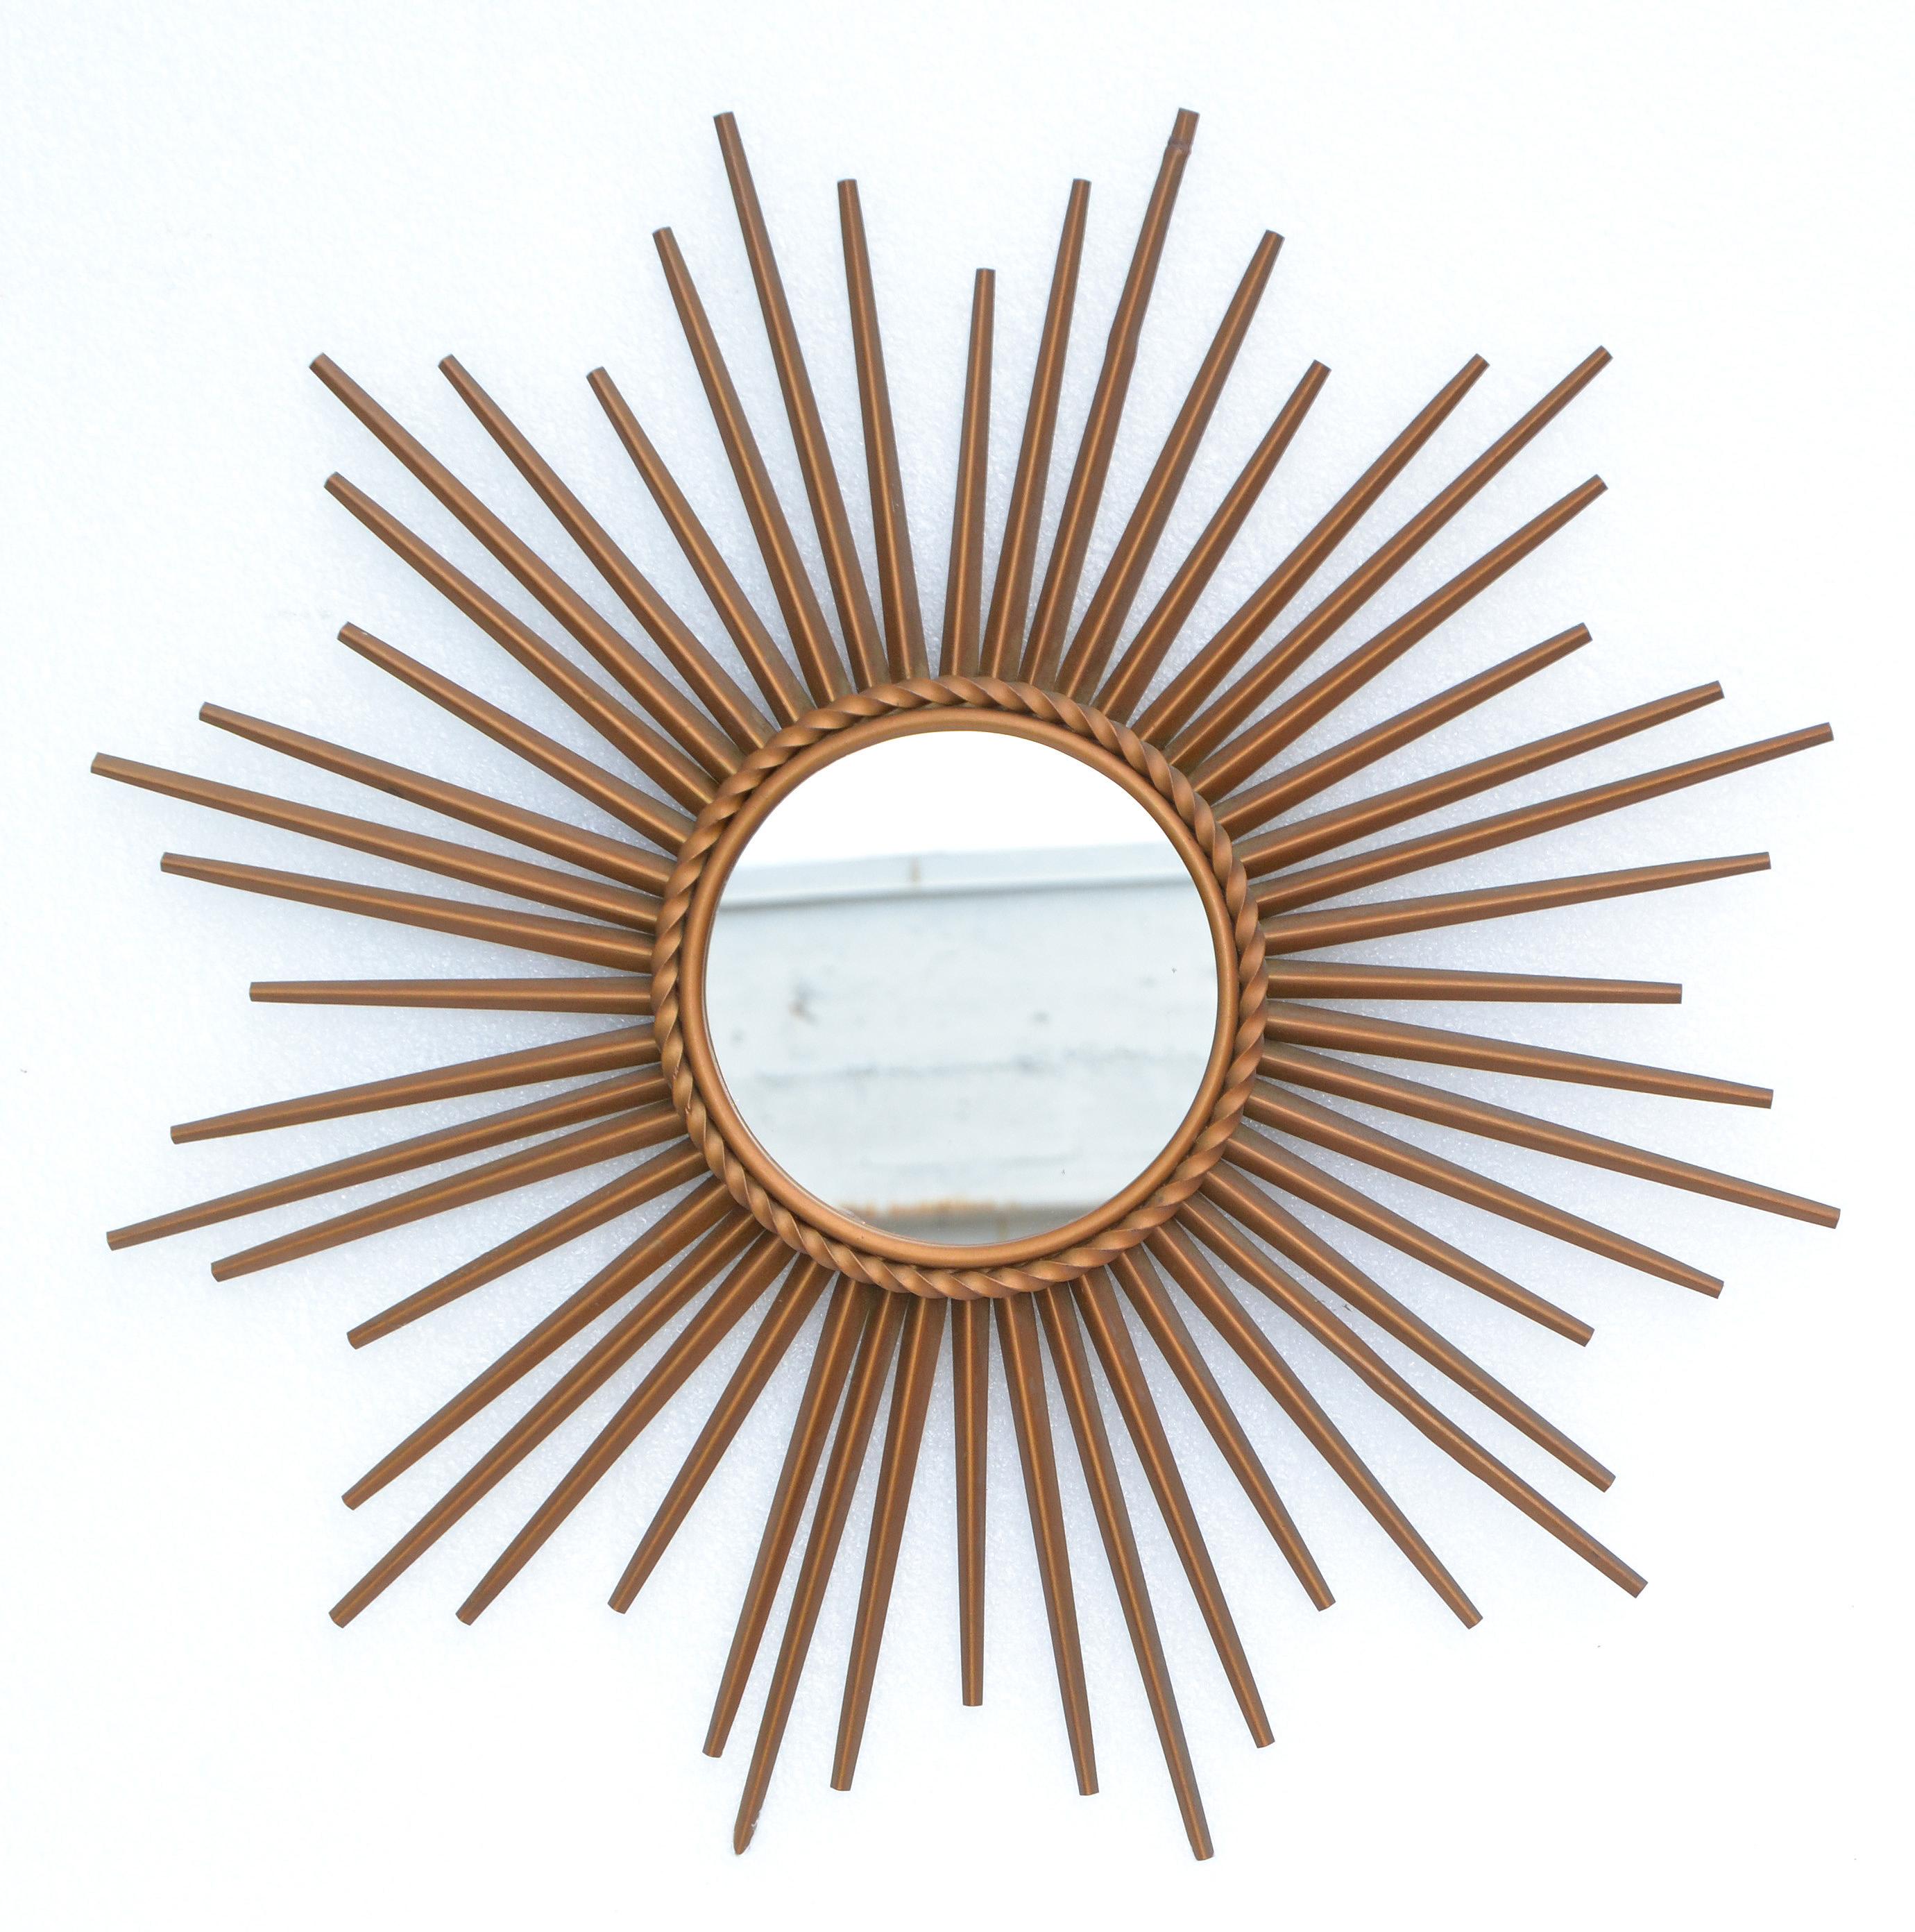 Signed Chaty Vallauris France Gold Finish Iron Sunburst Mirror Wall Mirror, 1970 For Sale 9